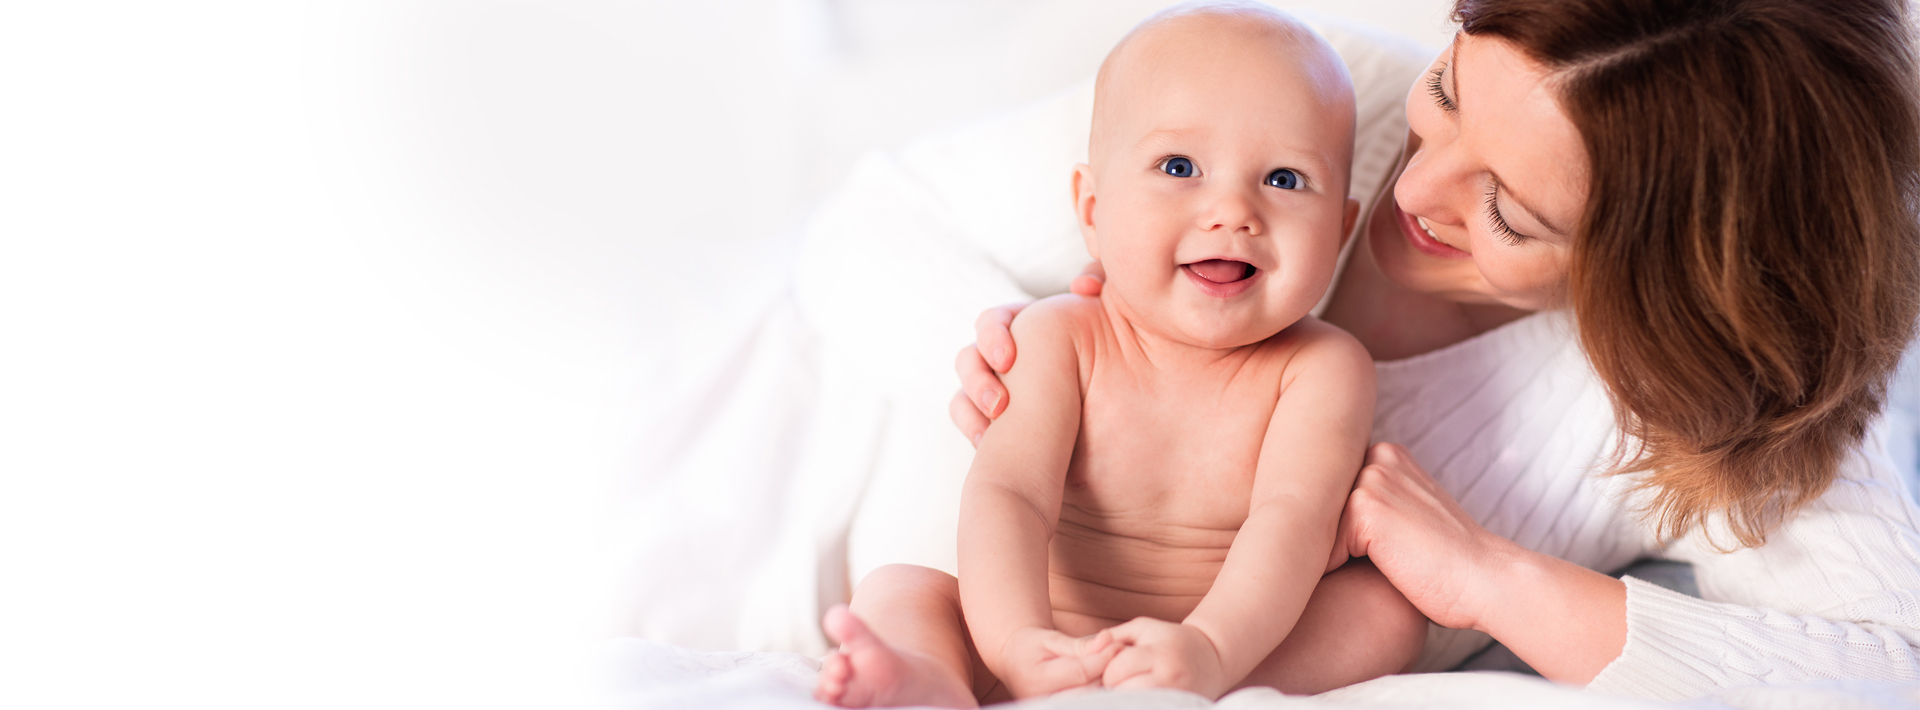 How to choose the right size disposable diaper for your baby